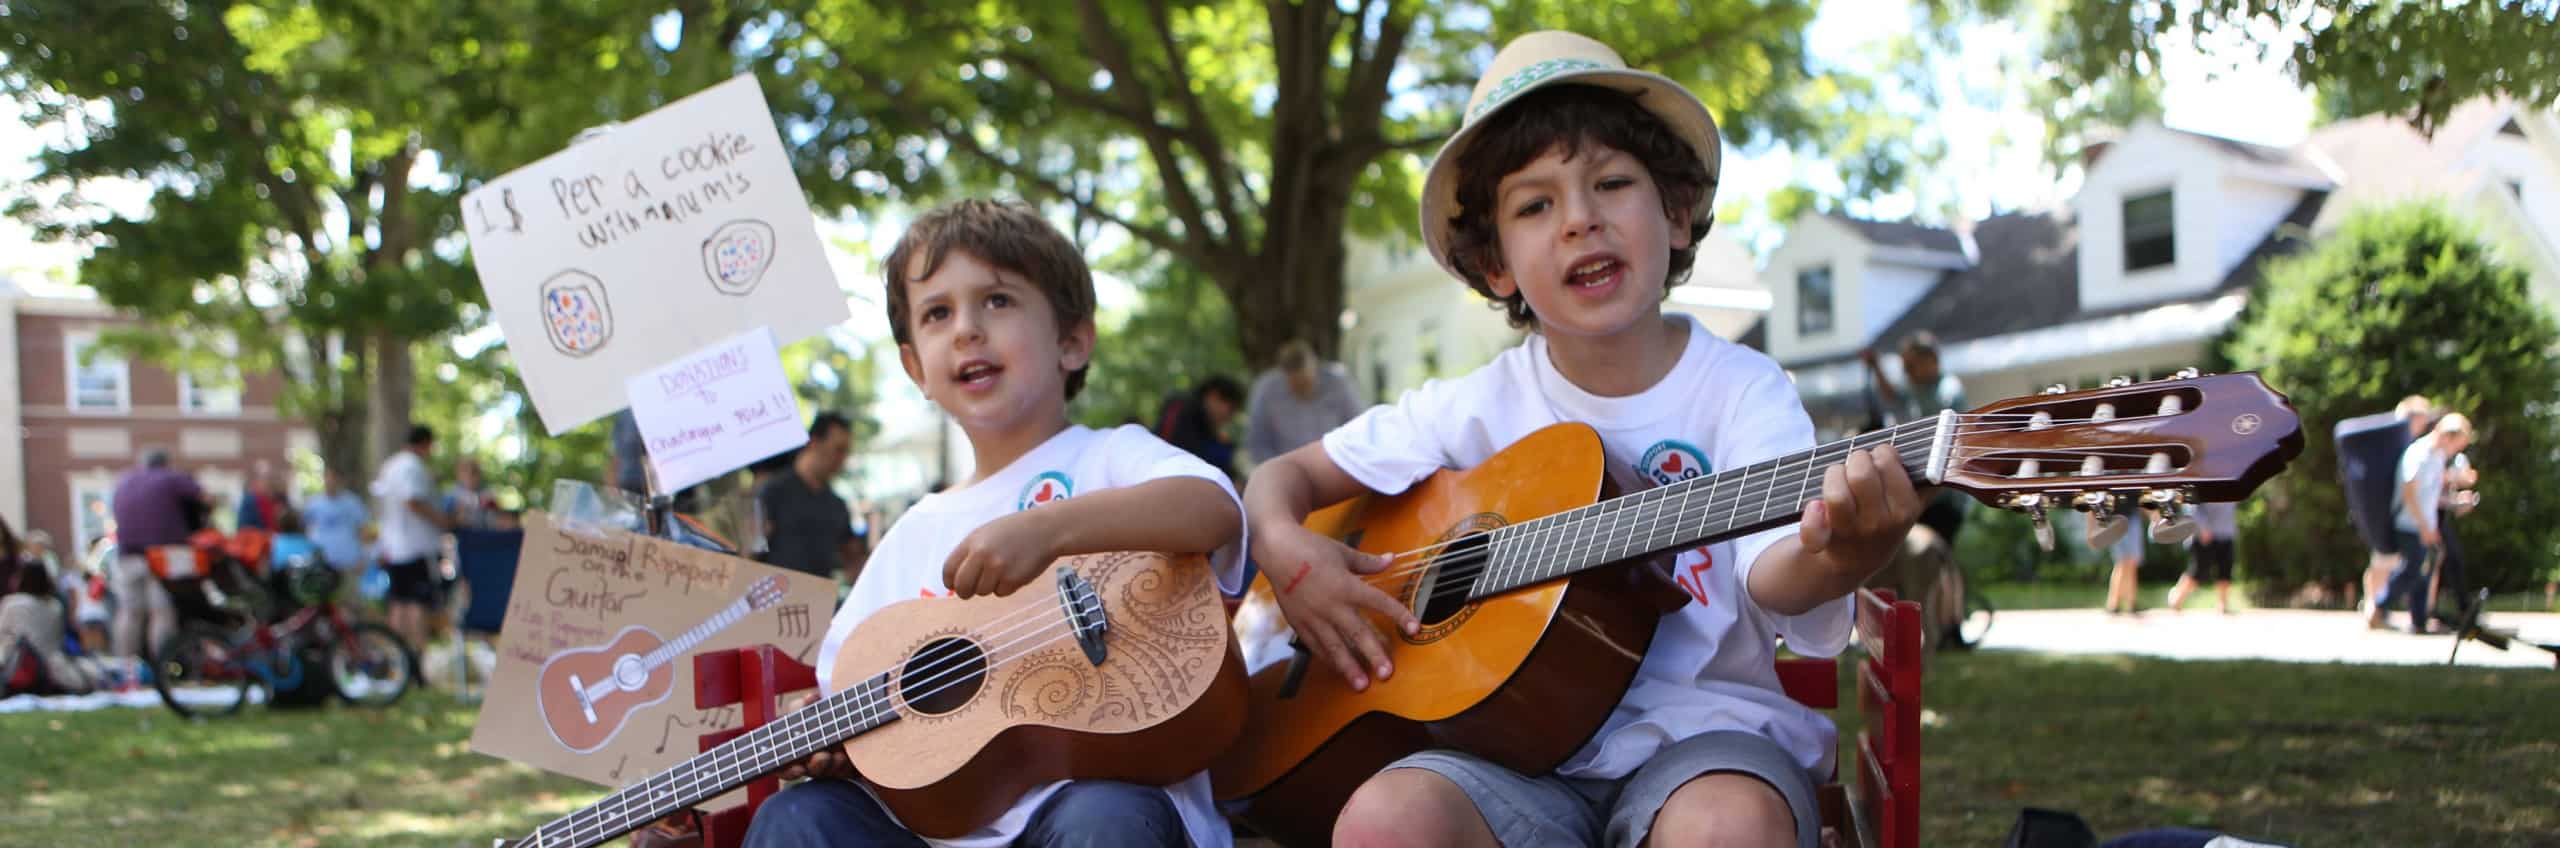 Two boys playing guitar to raise money for the Chautauqua Fund